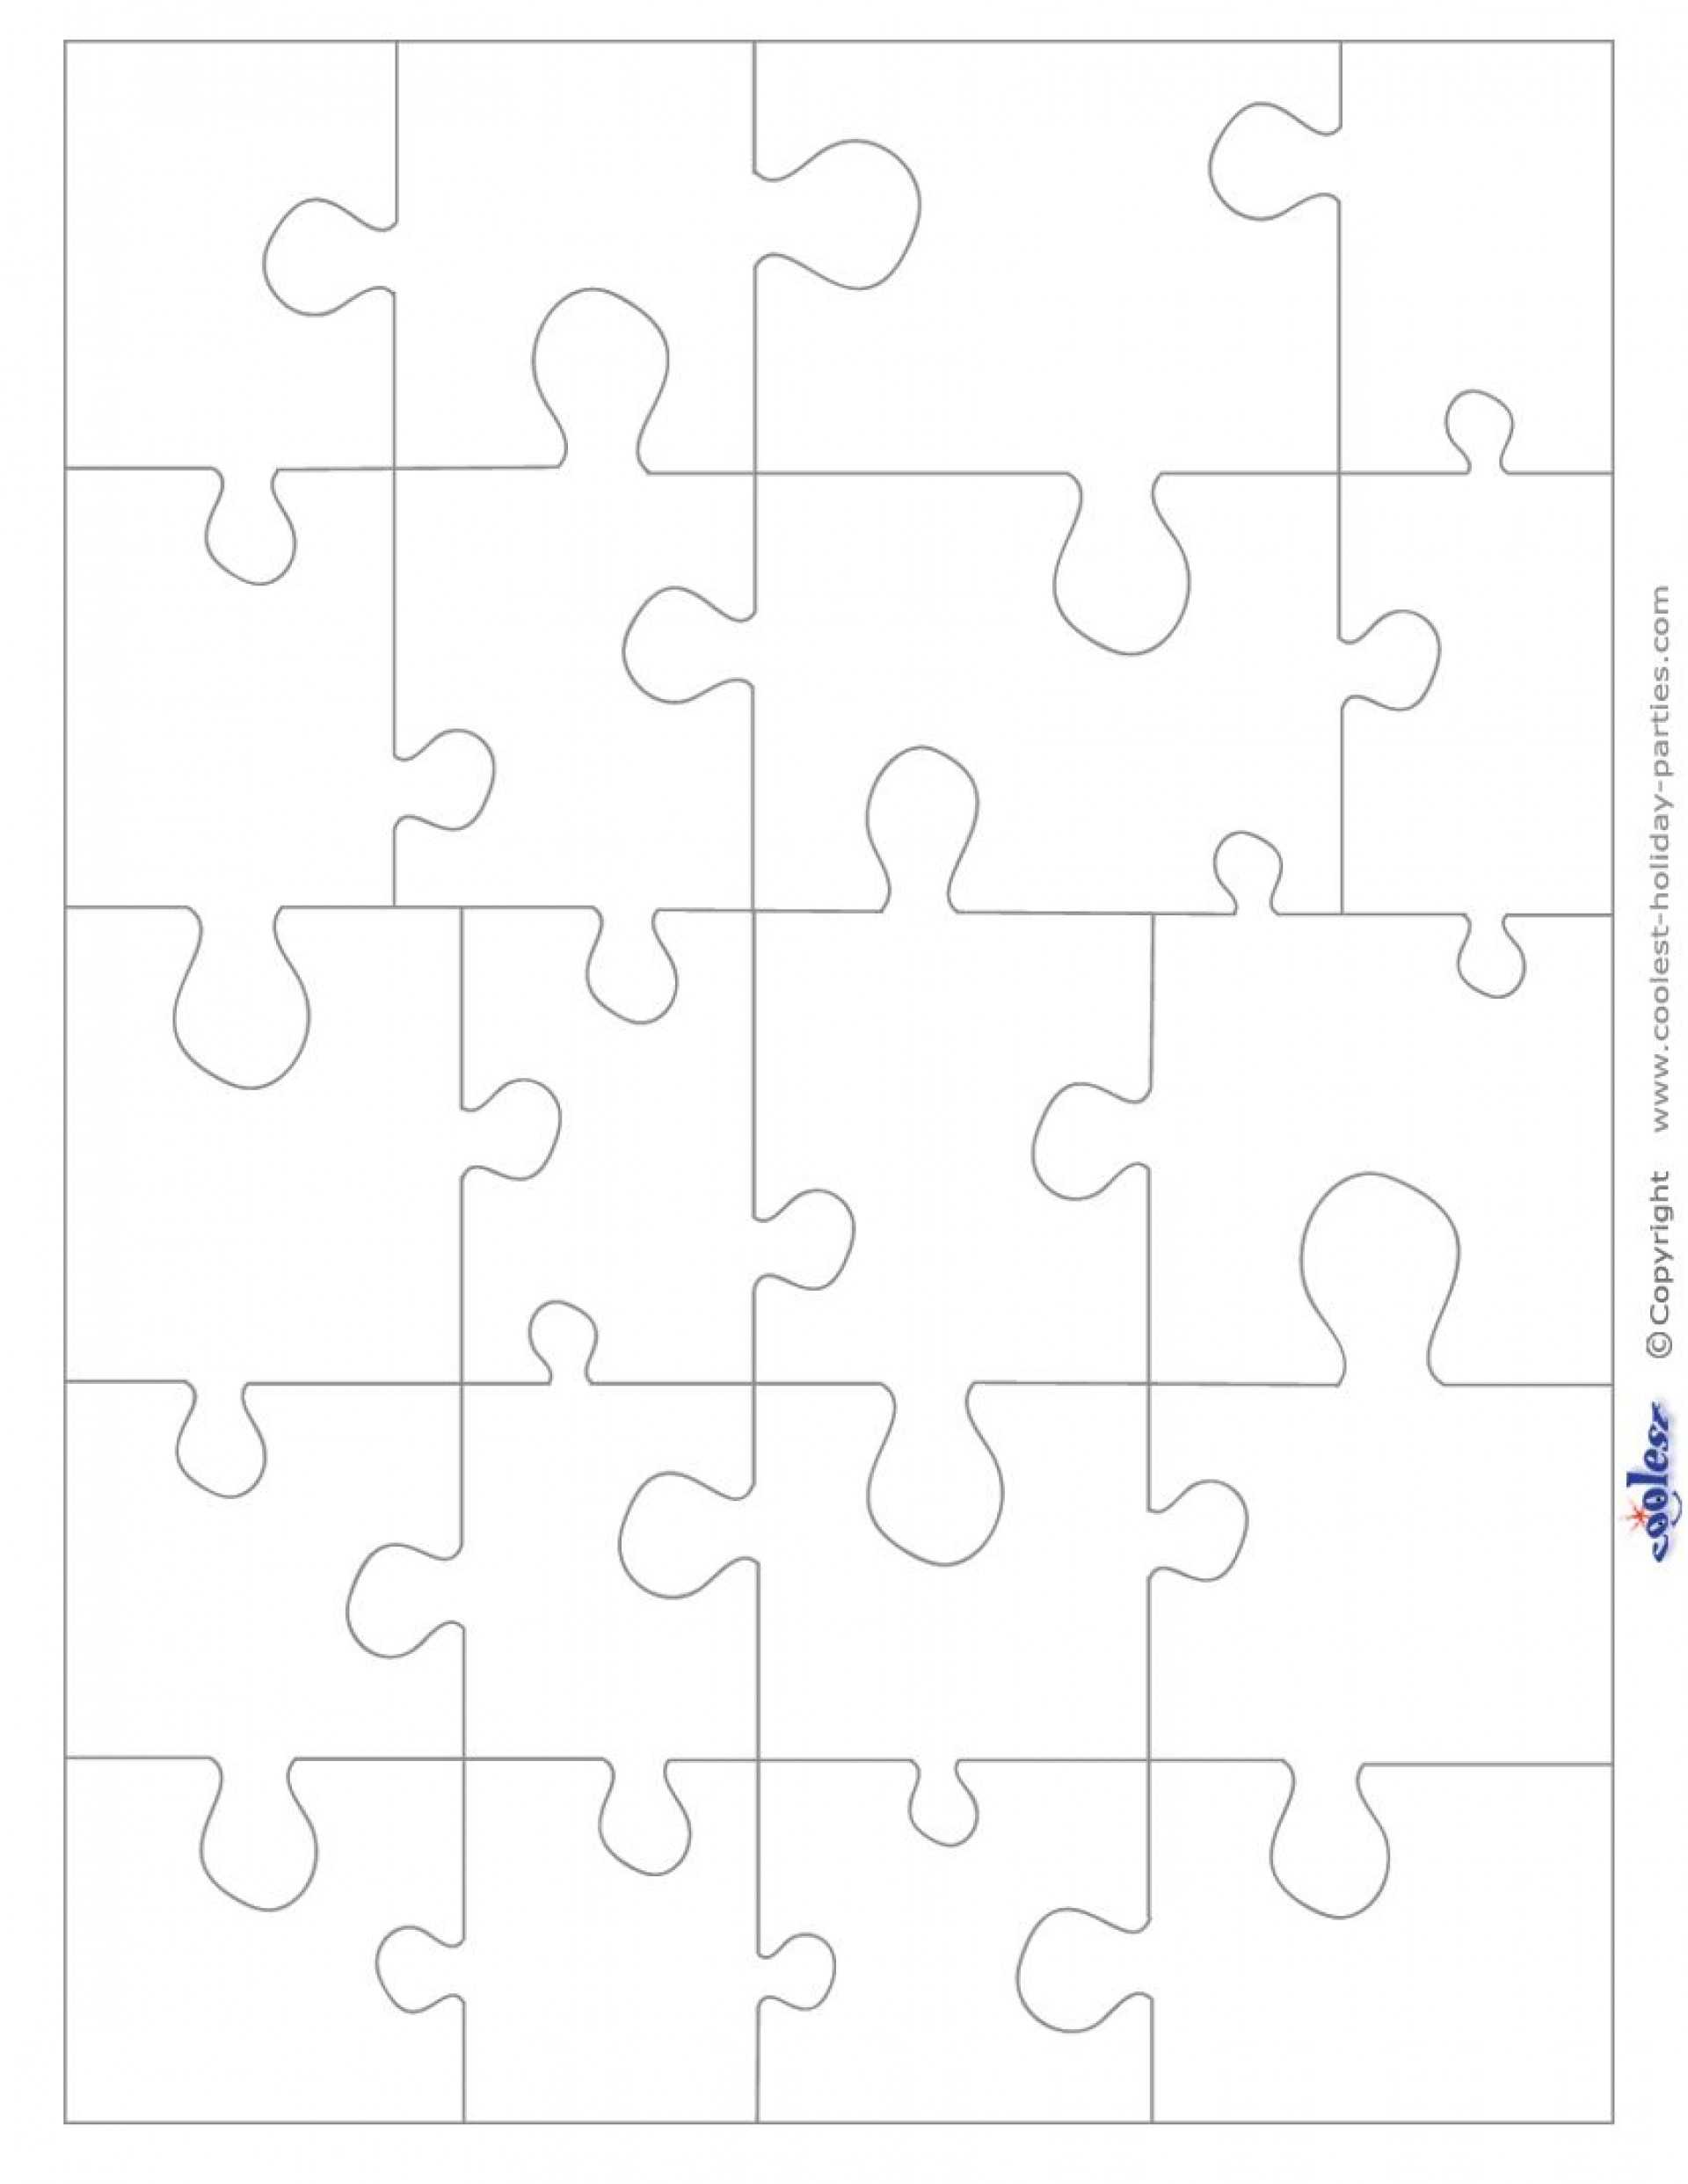 020 Template Ideas Blank Puzzle Fearsome Pieces Pdf 2 Piece With Regard To Blank Jigsaw Piece Template